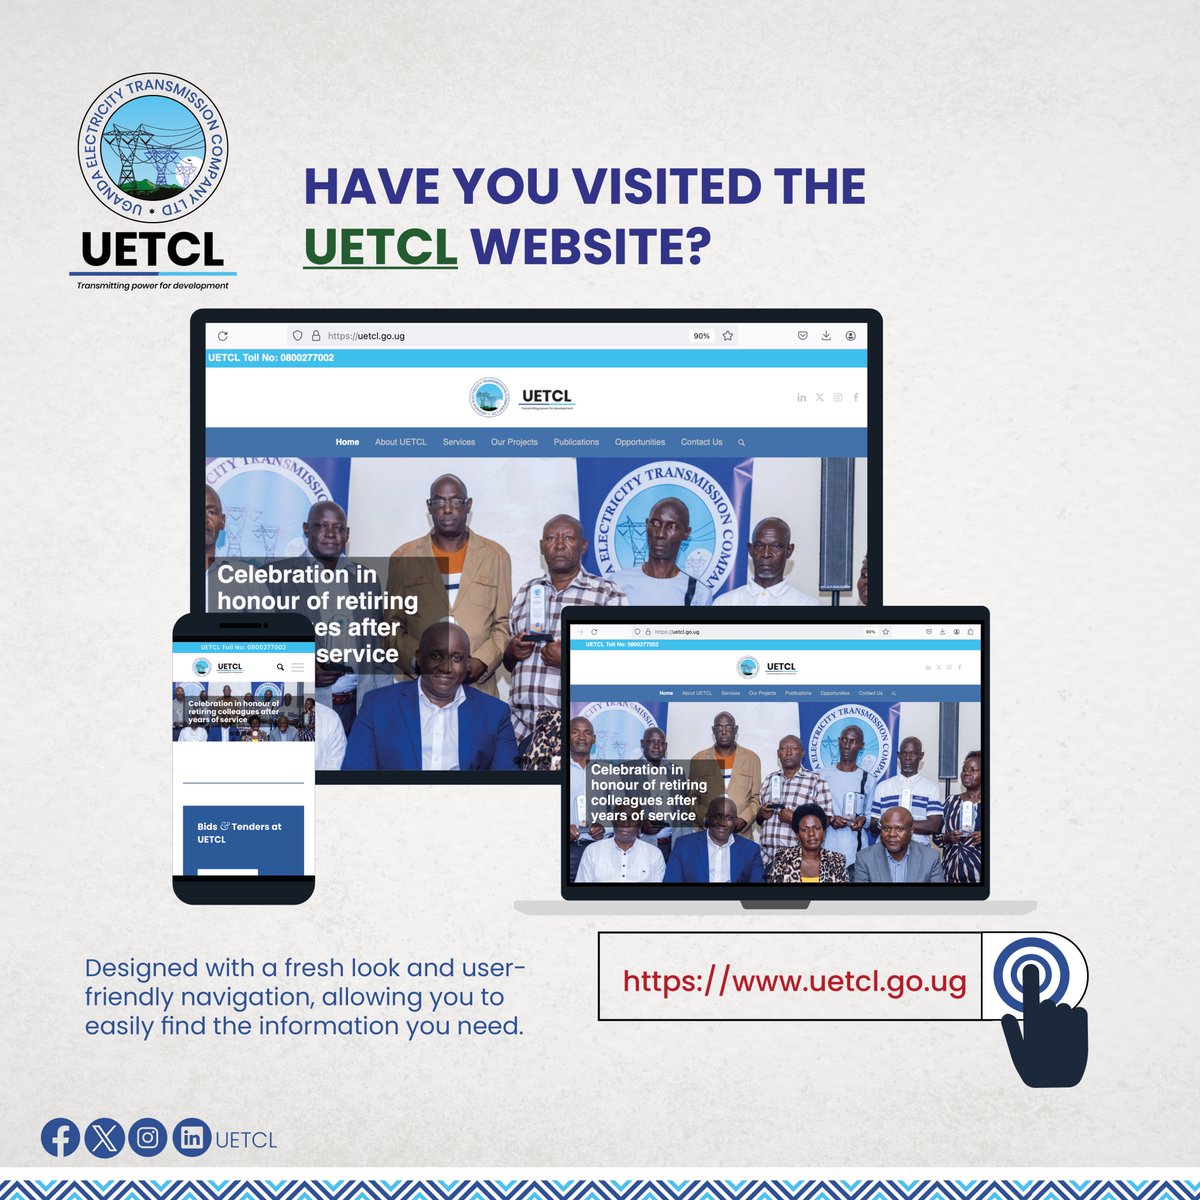 We have given our website a makeover to serve you better. Explore the sleek design, enhanced functionality, and seamless user experience. Click here ⇢ uetcl.go.ug and let us know what you think.